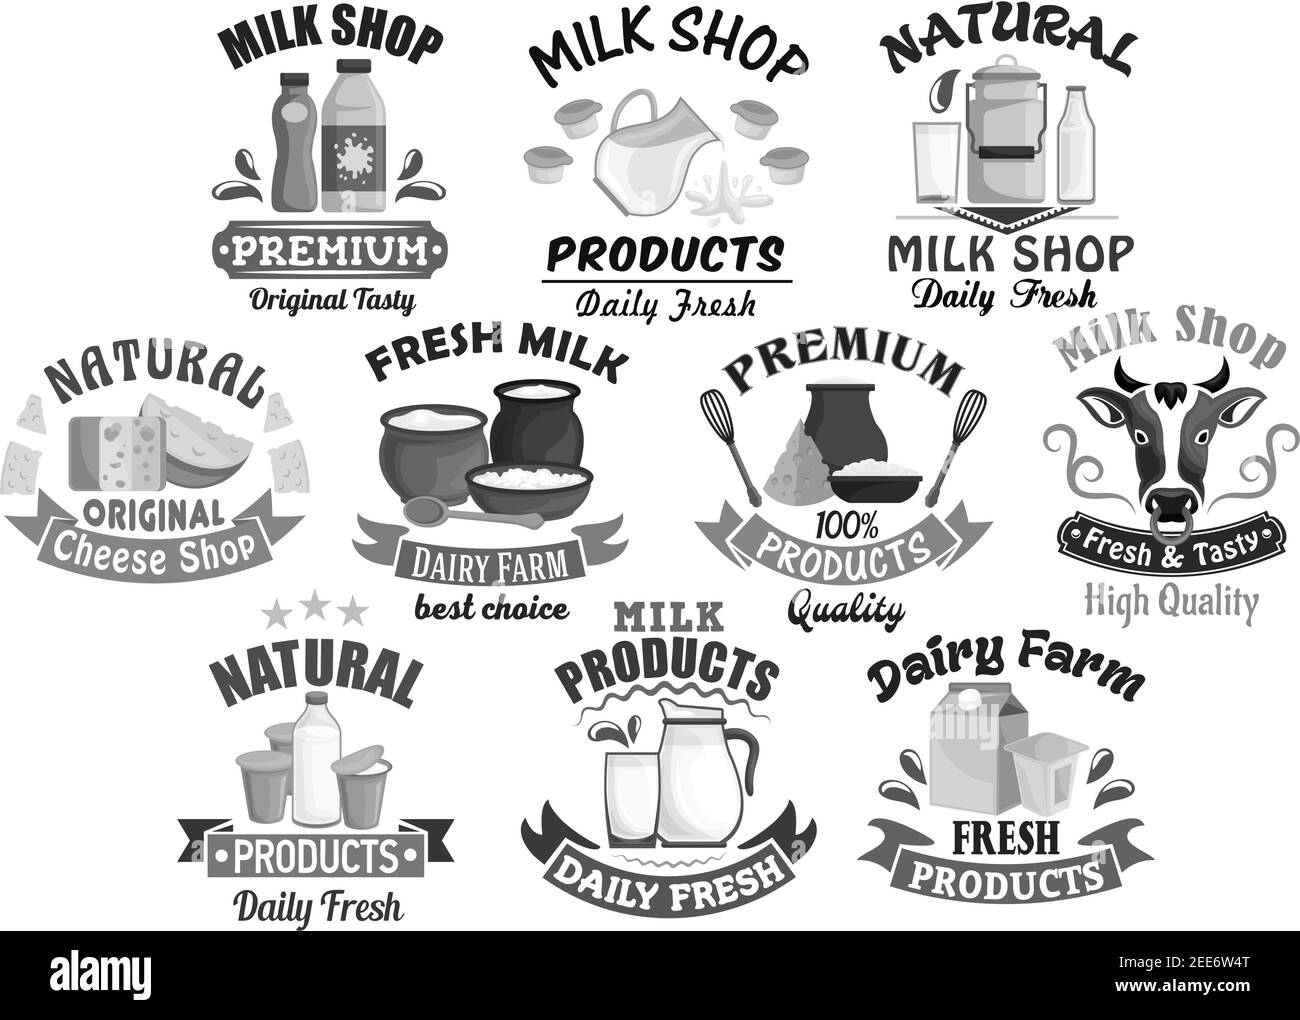 Milk shop icons for farm dairy products. Milk food butter and cheese, sour cream and curd or yogurt and kefir in pitcher or bottle. Vector symbols of Stock Vector